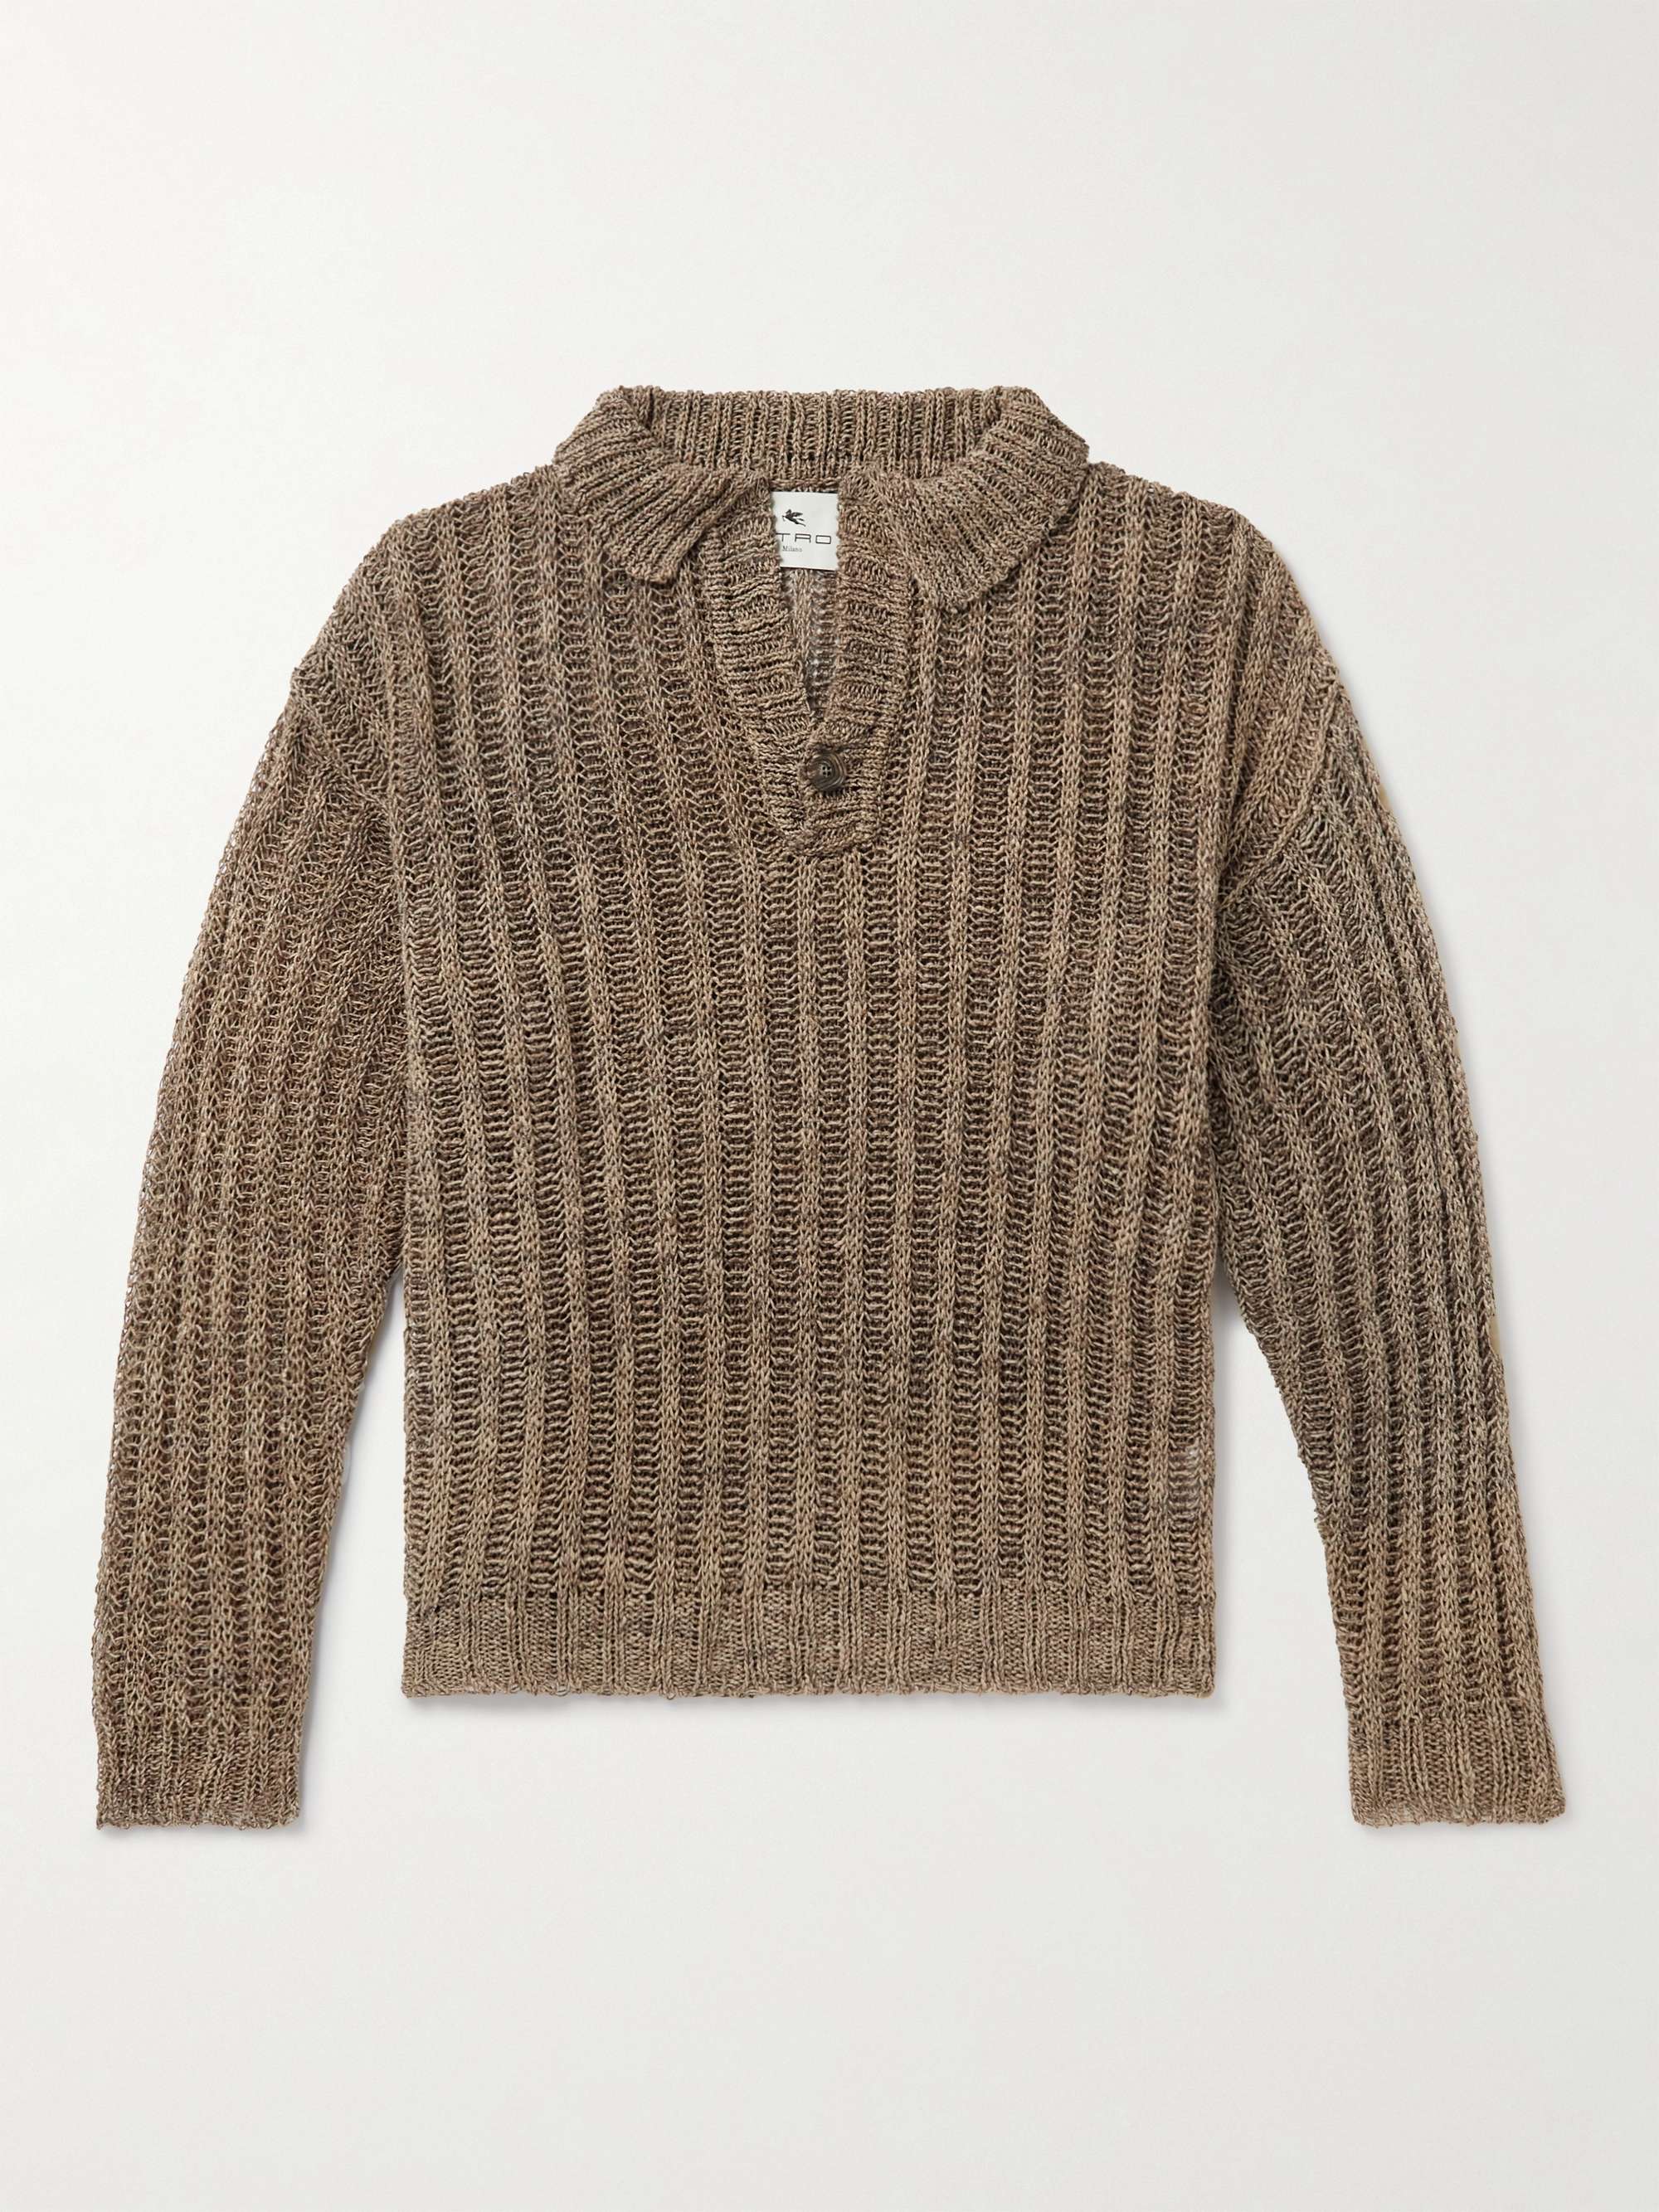 ETRO Ribbed Open-Knit Linen, Cotton and Silk-Blend Sweater